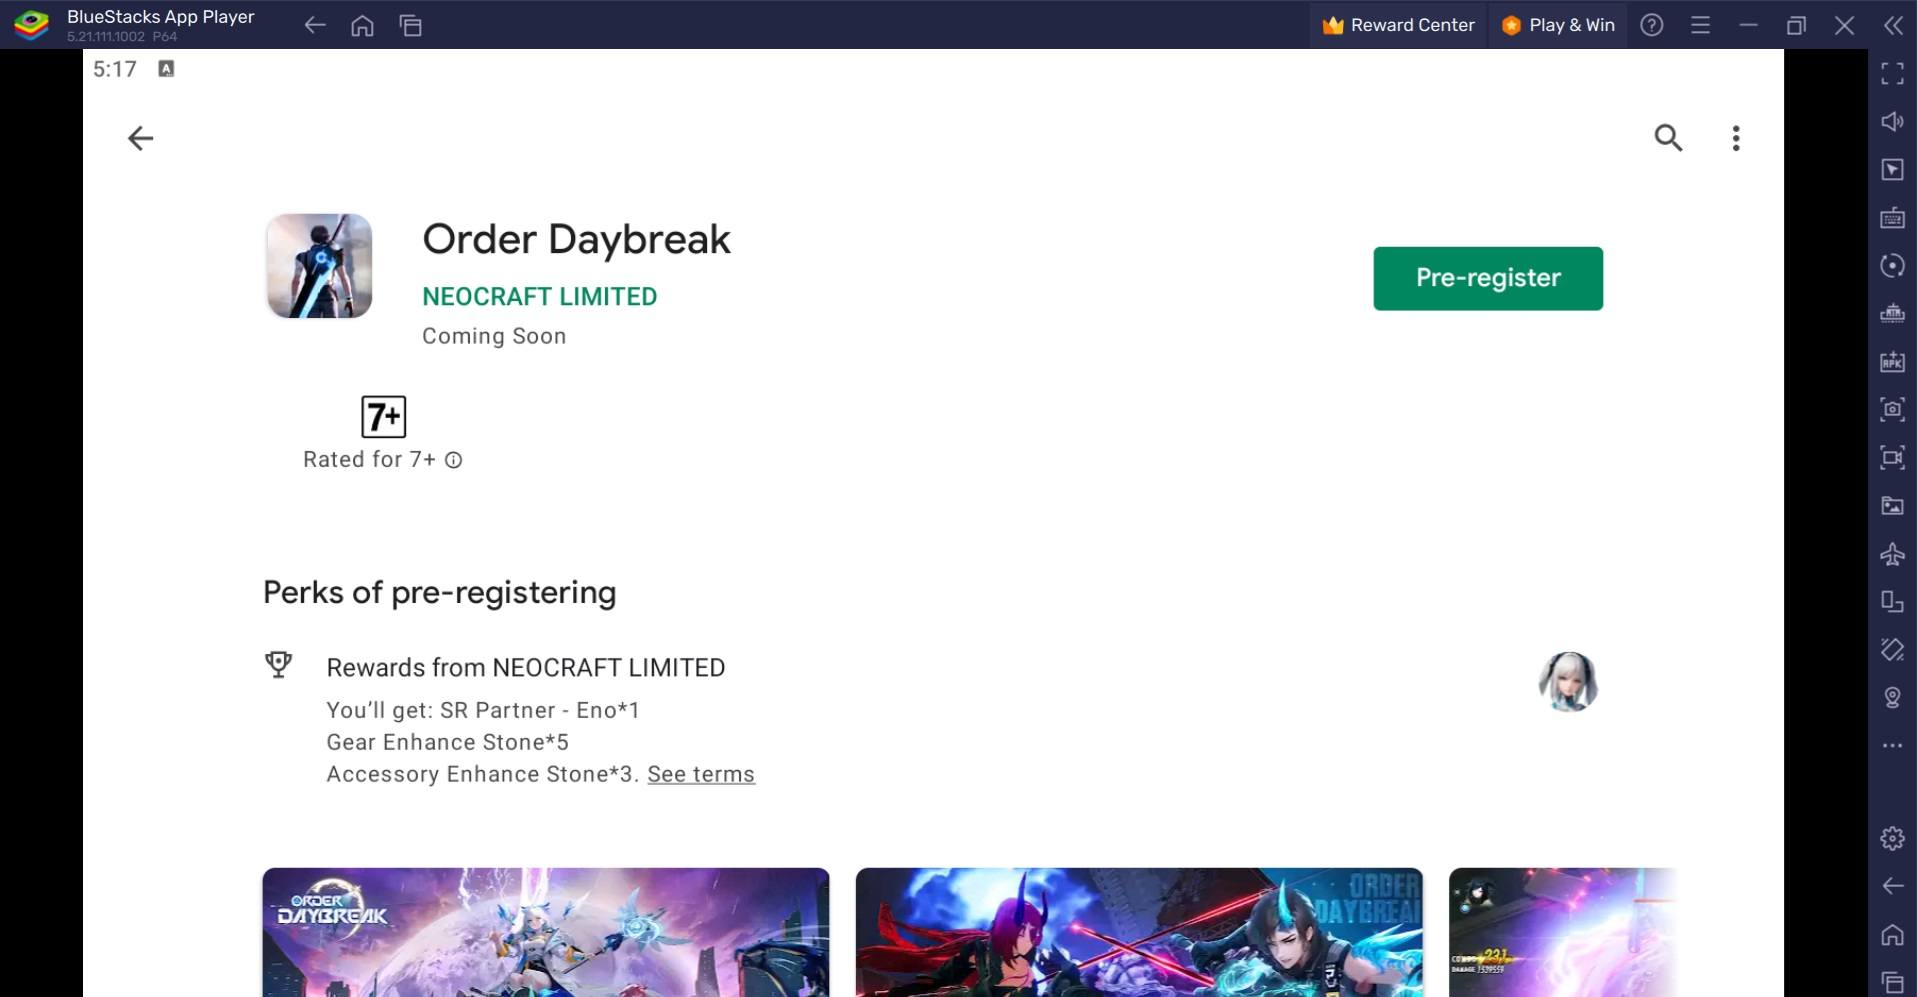 How to Play Order Daybreak on PC with BlueStacks